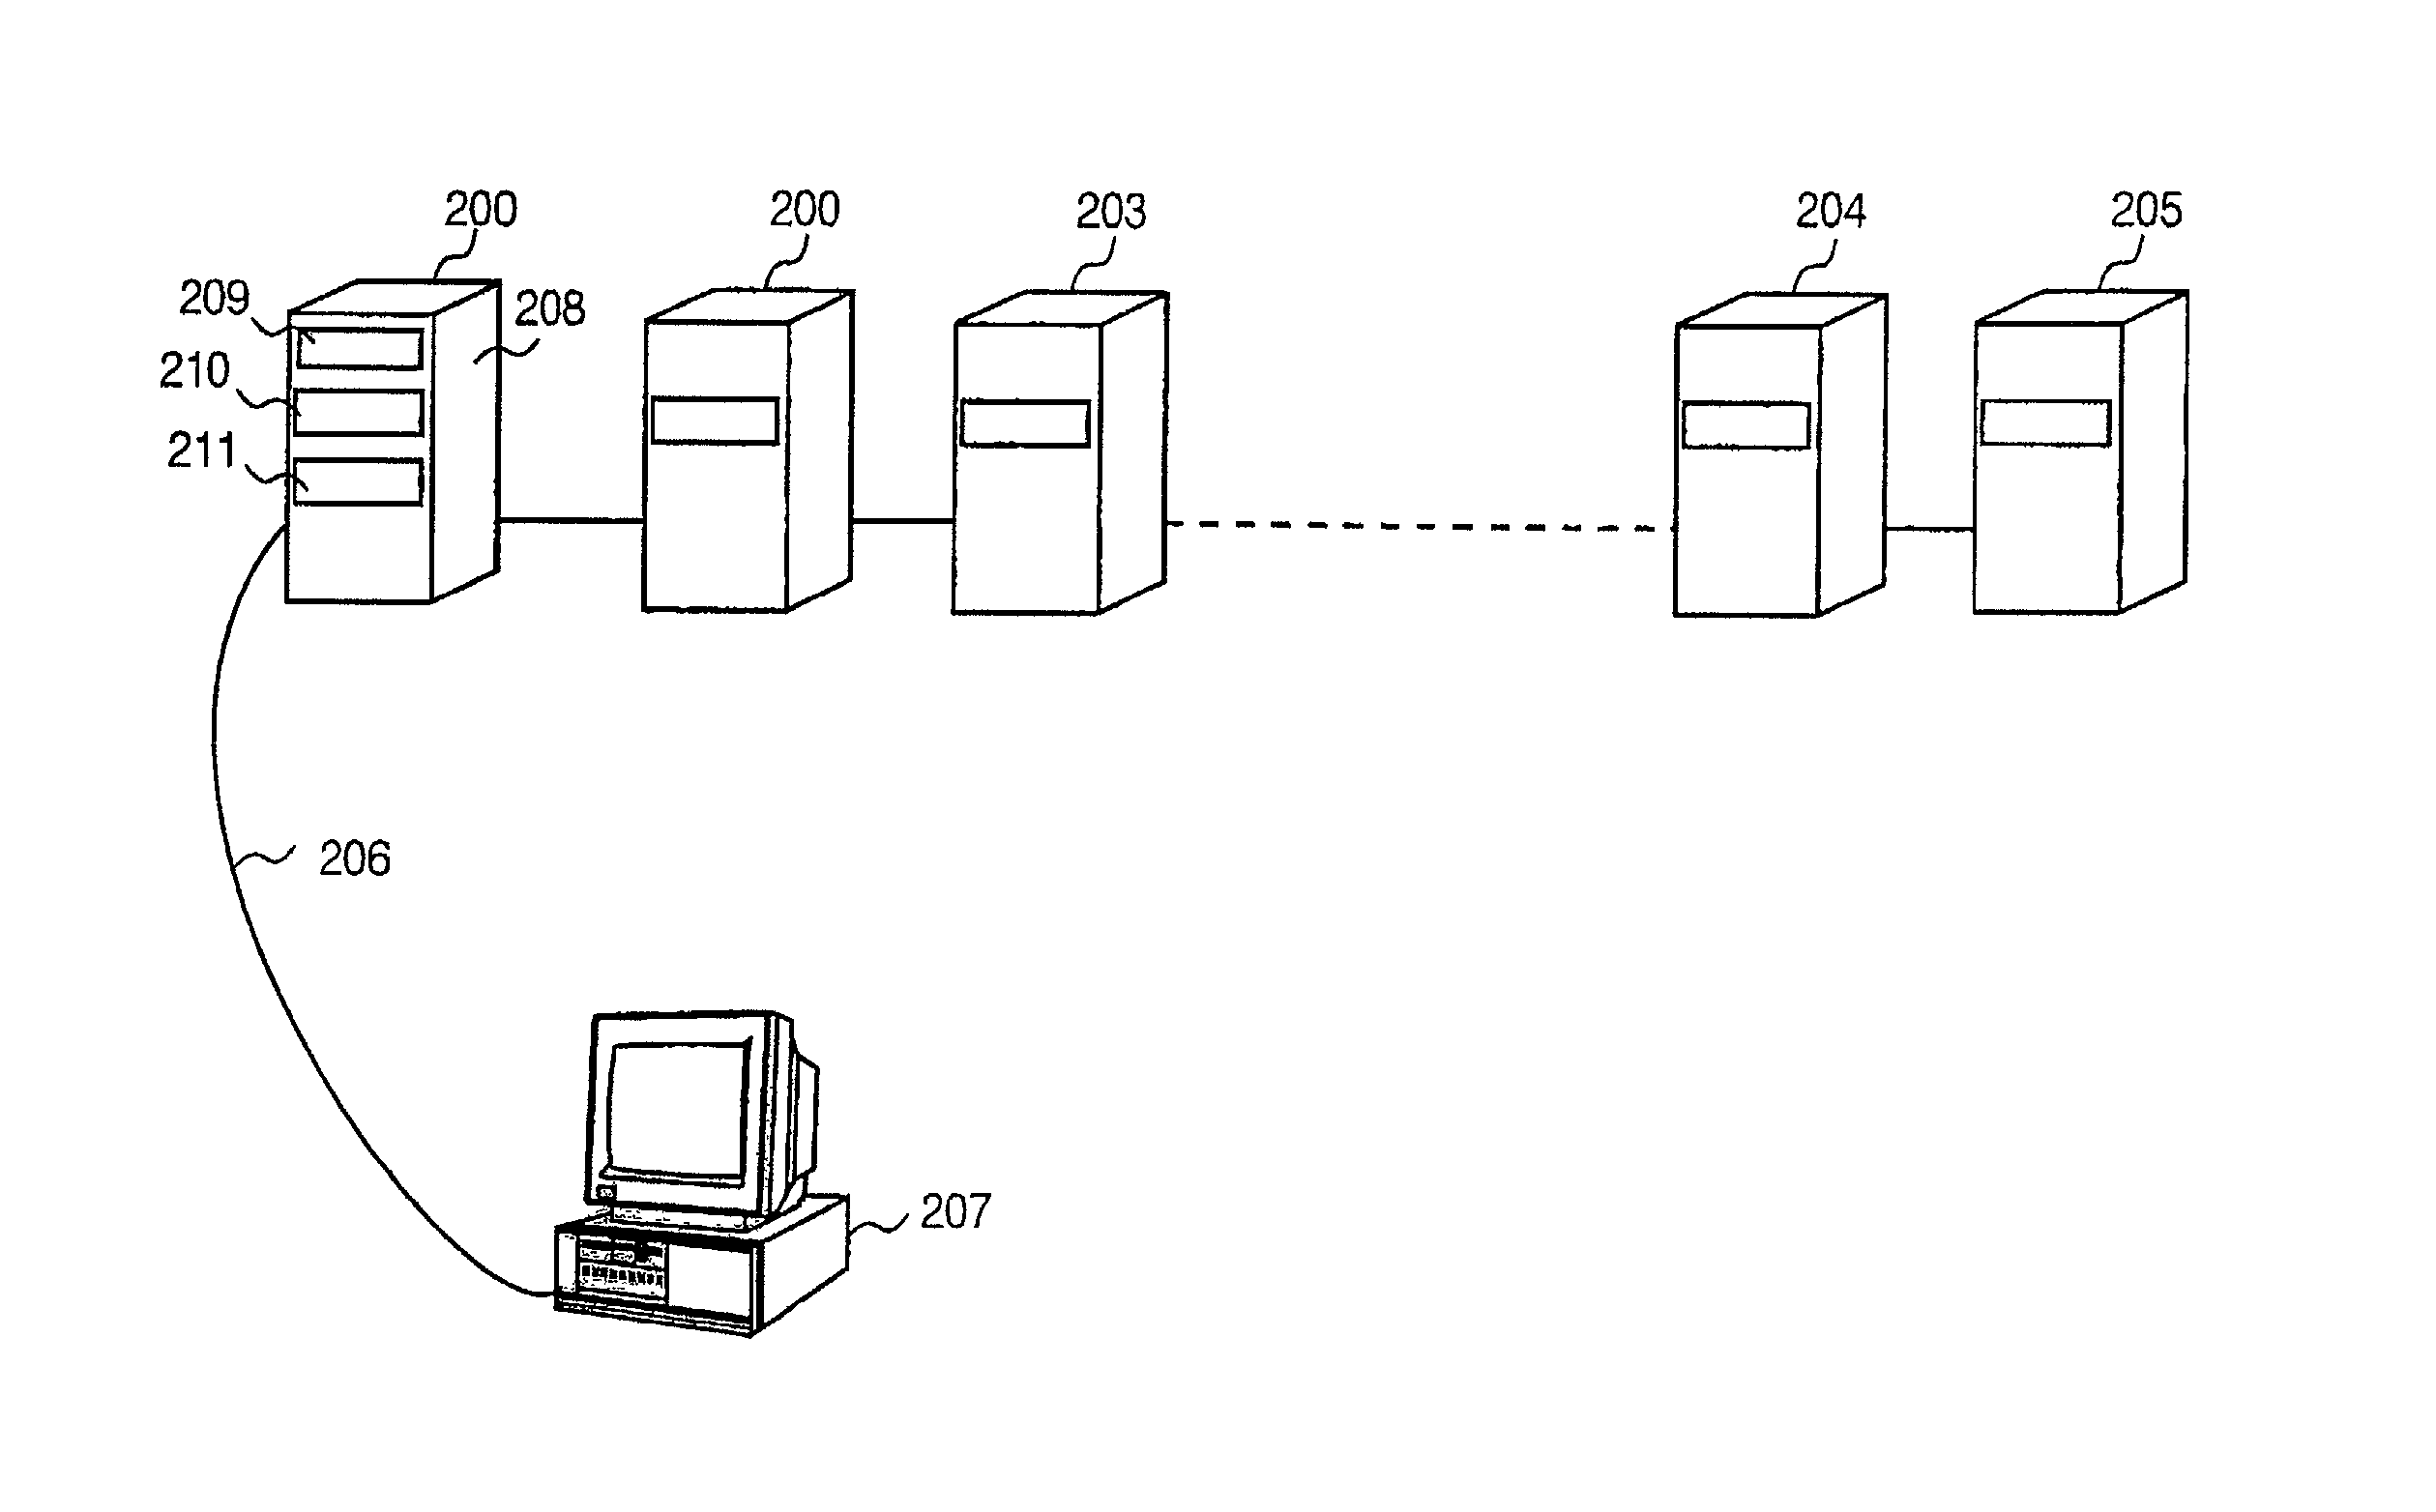 Aggregation of multiple headless computer entities into a single computer entity group